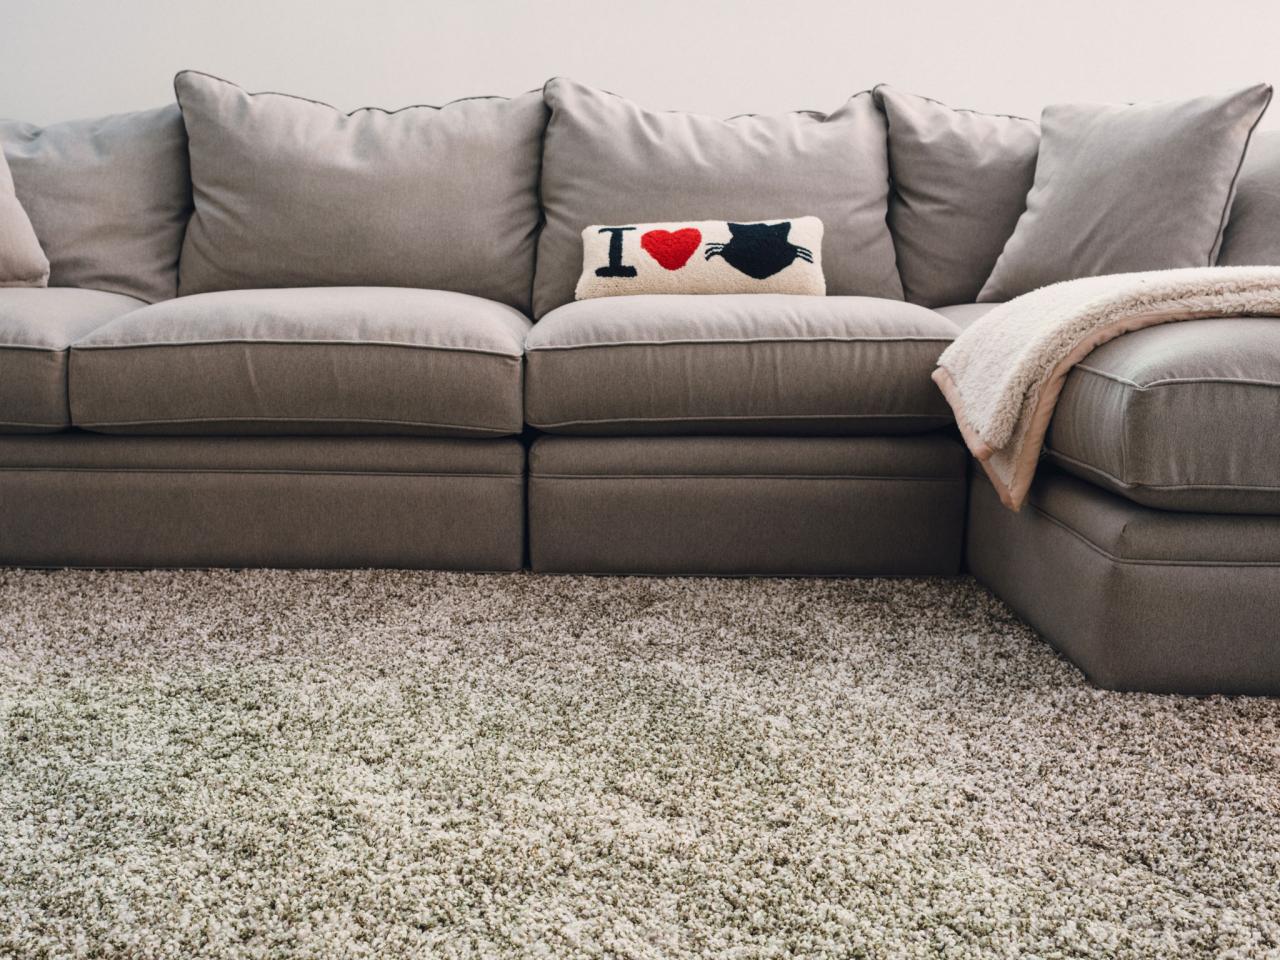 Carpets – Add An Attractive Look To Floor